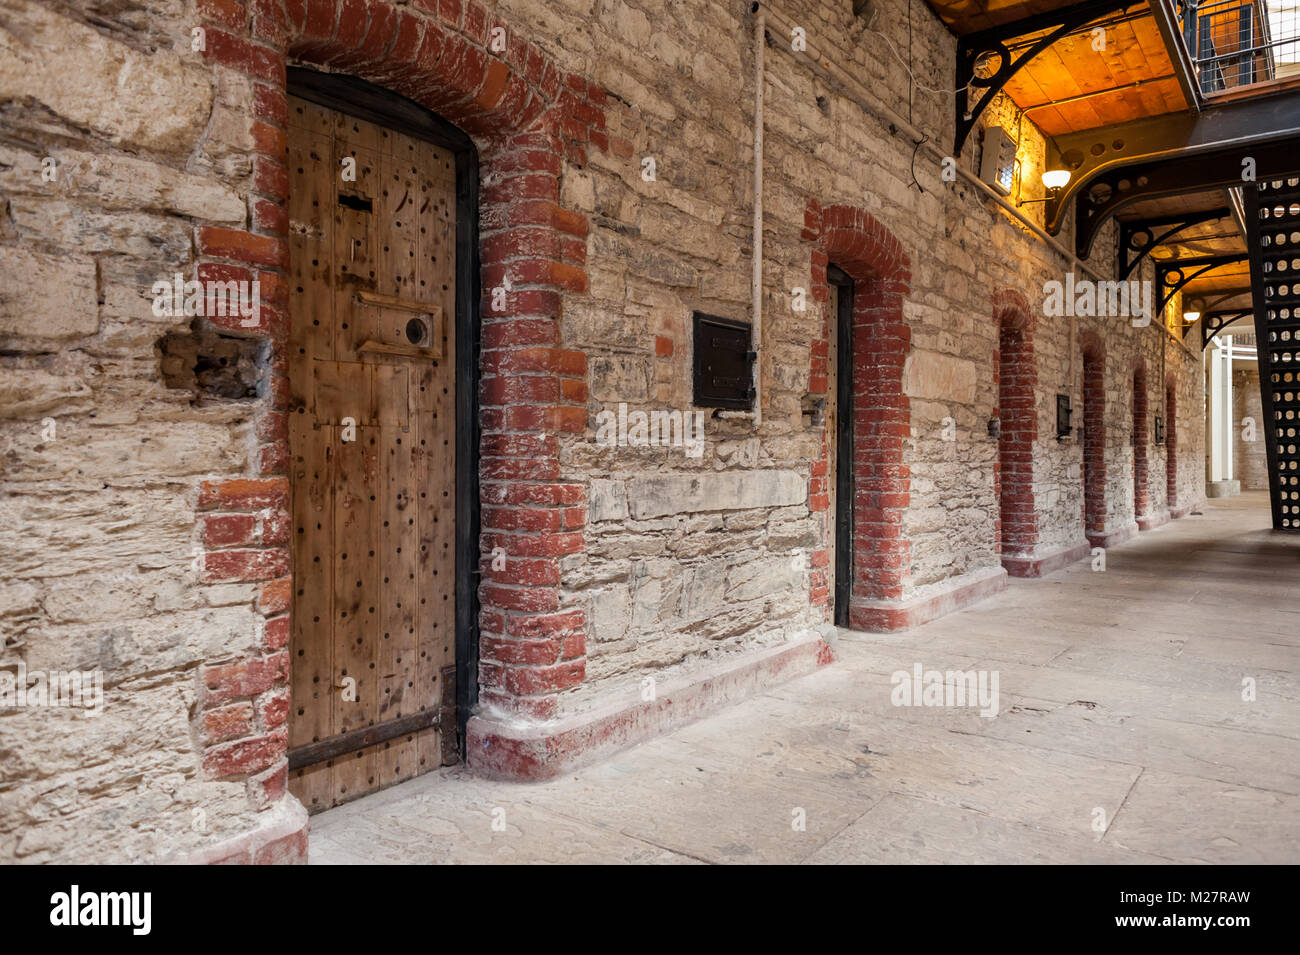 Cells in the now closed Cork City Gaol, Cork, Ireland which is a tourist attraction, heritage, historic. Stock Photo